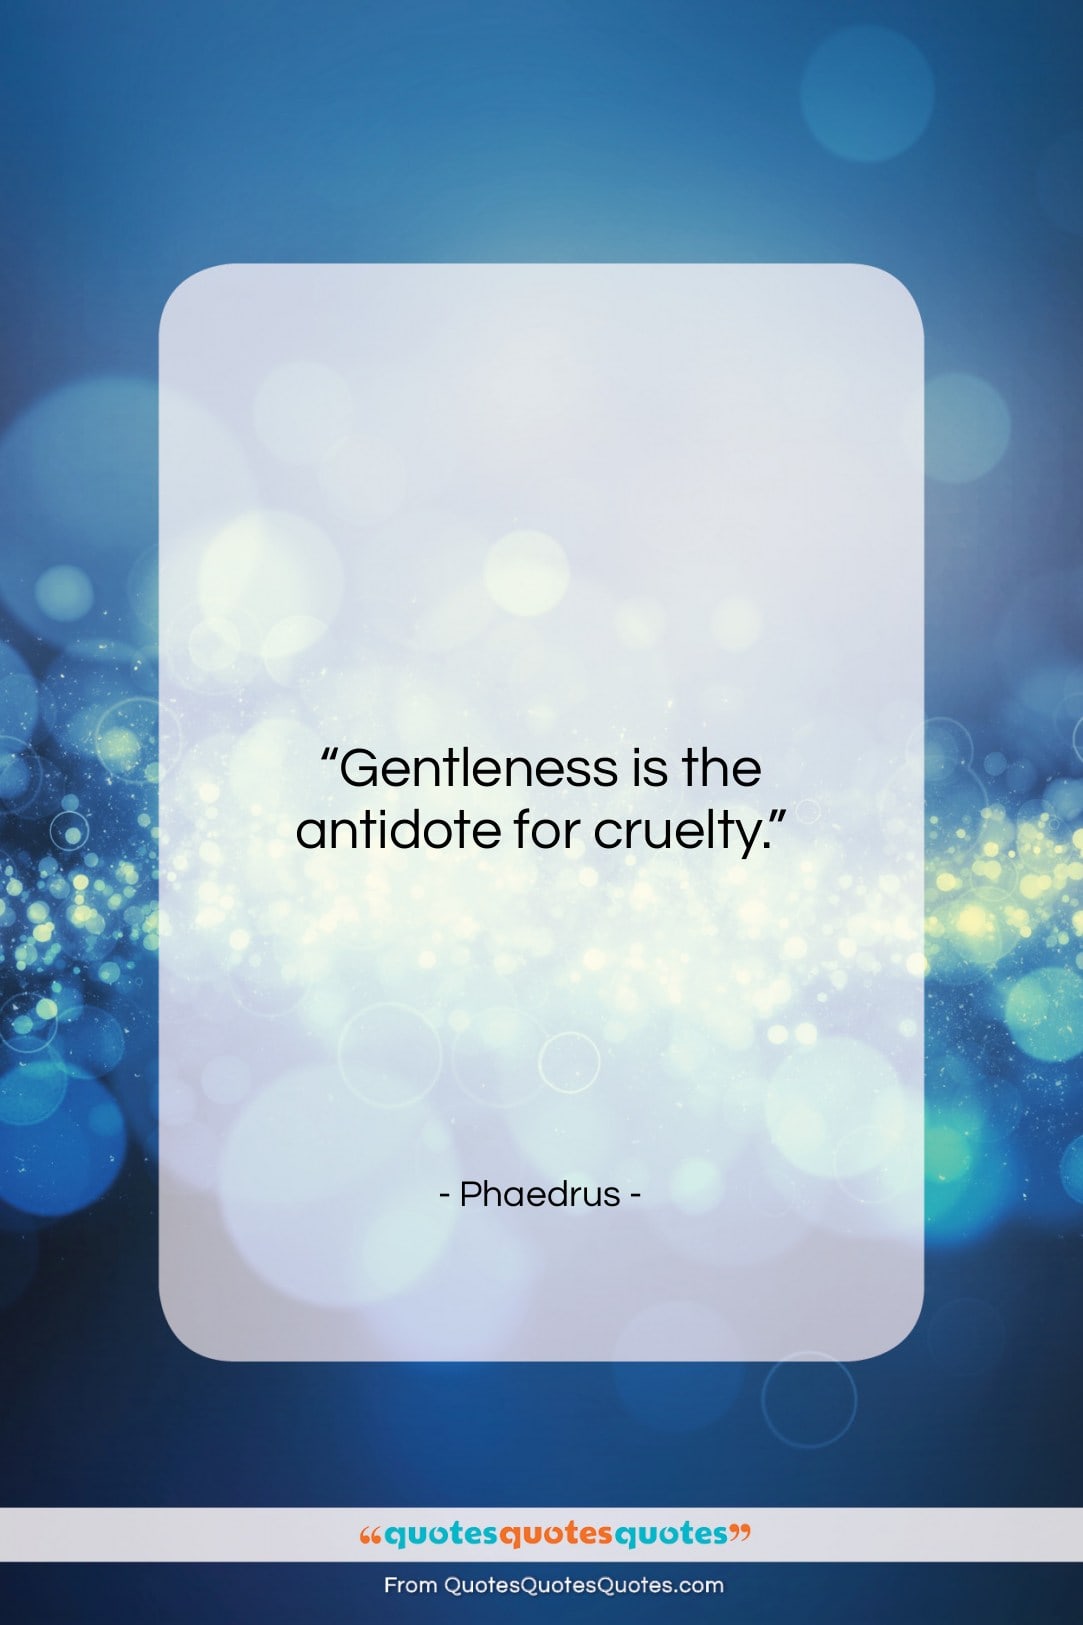 Phaedrus quote: “Gentleness is the antidote for cruelty….”- at QuotesQuotesQuotes.com